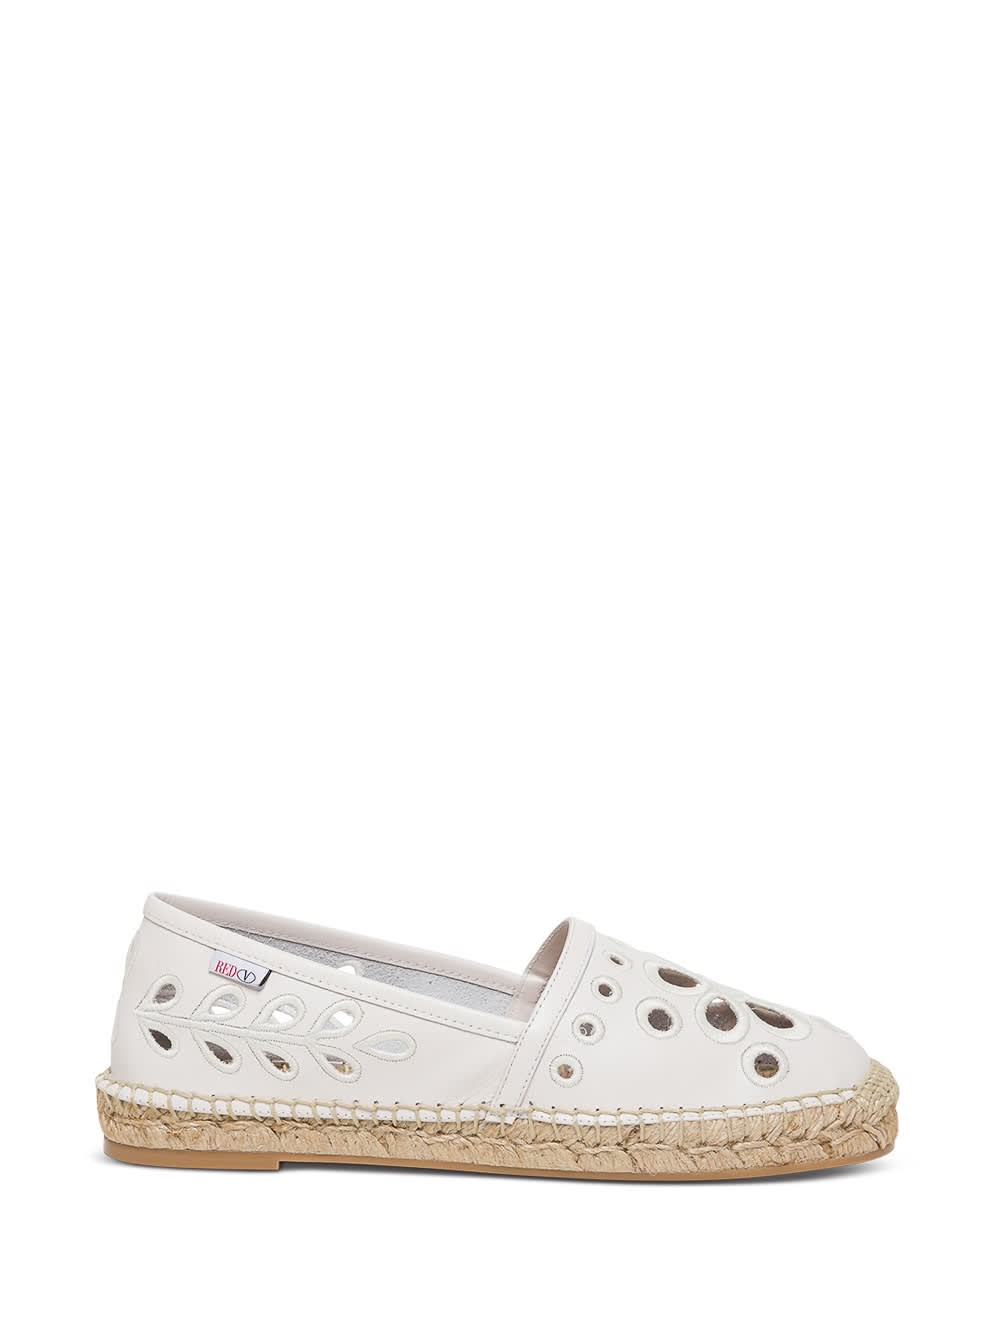 RED Valentino Flat Shoes